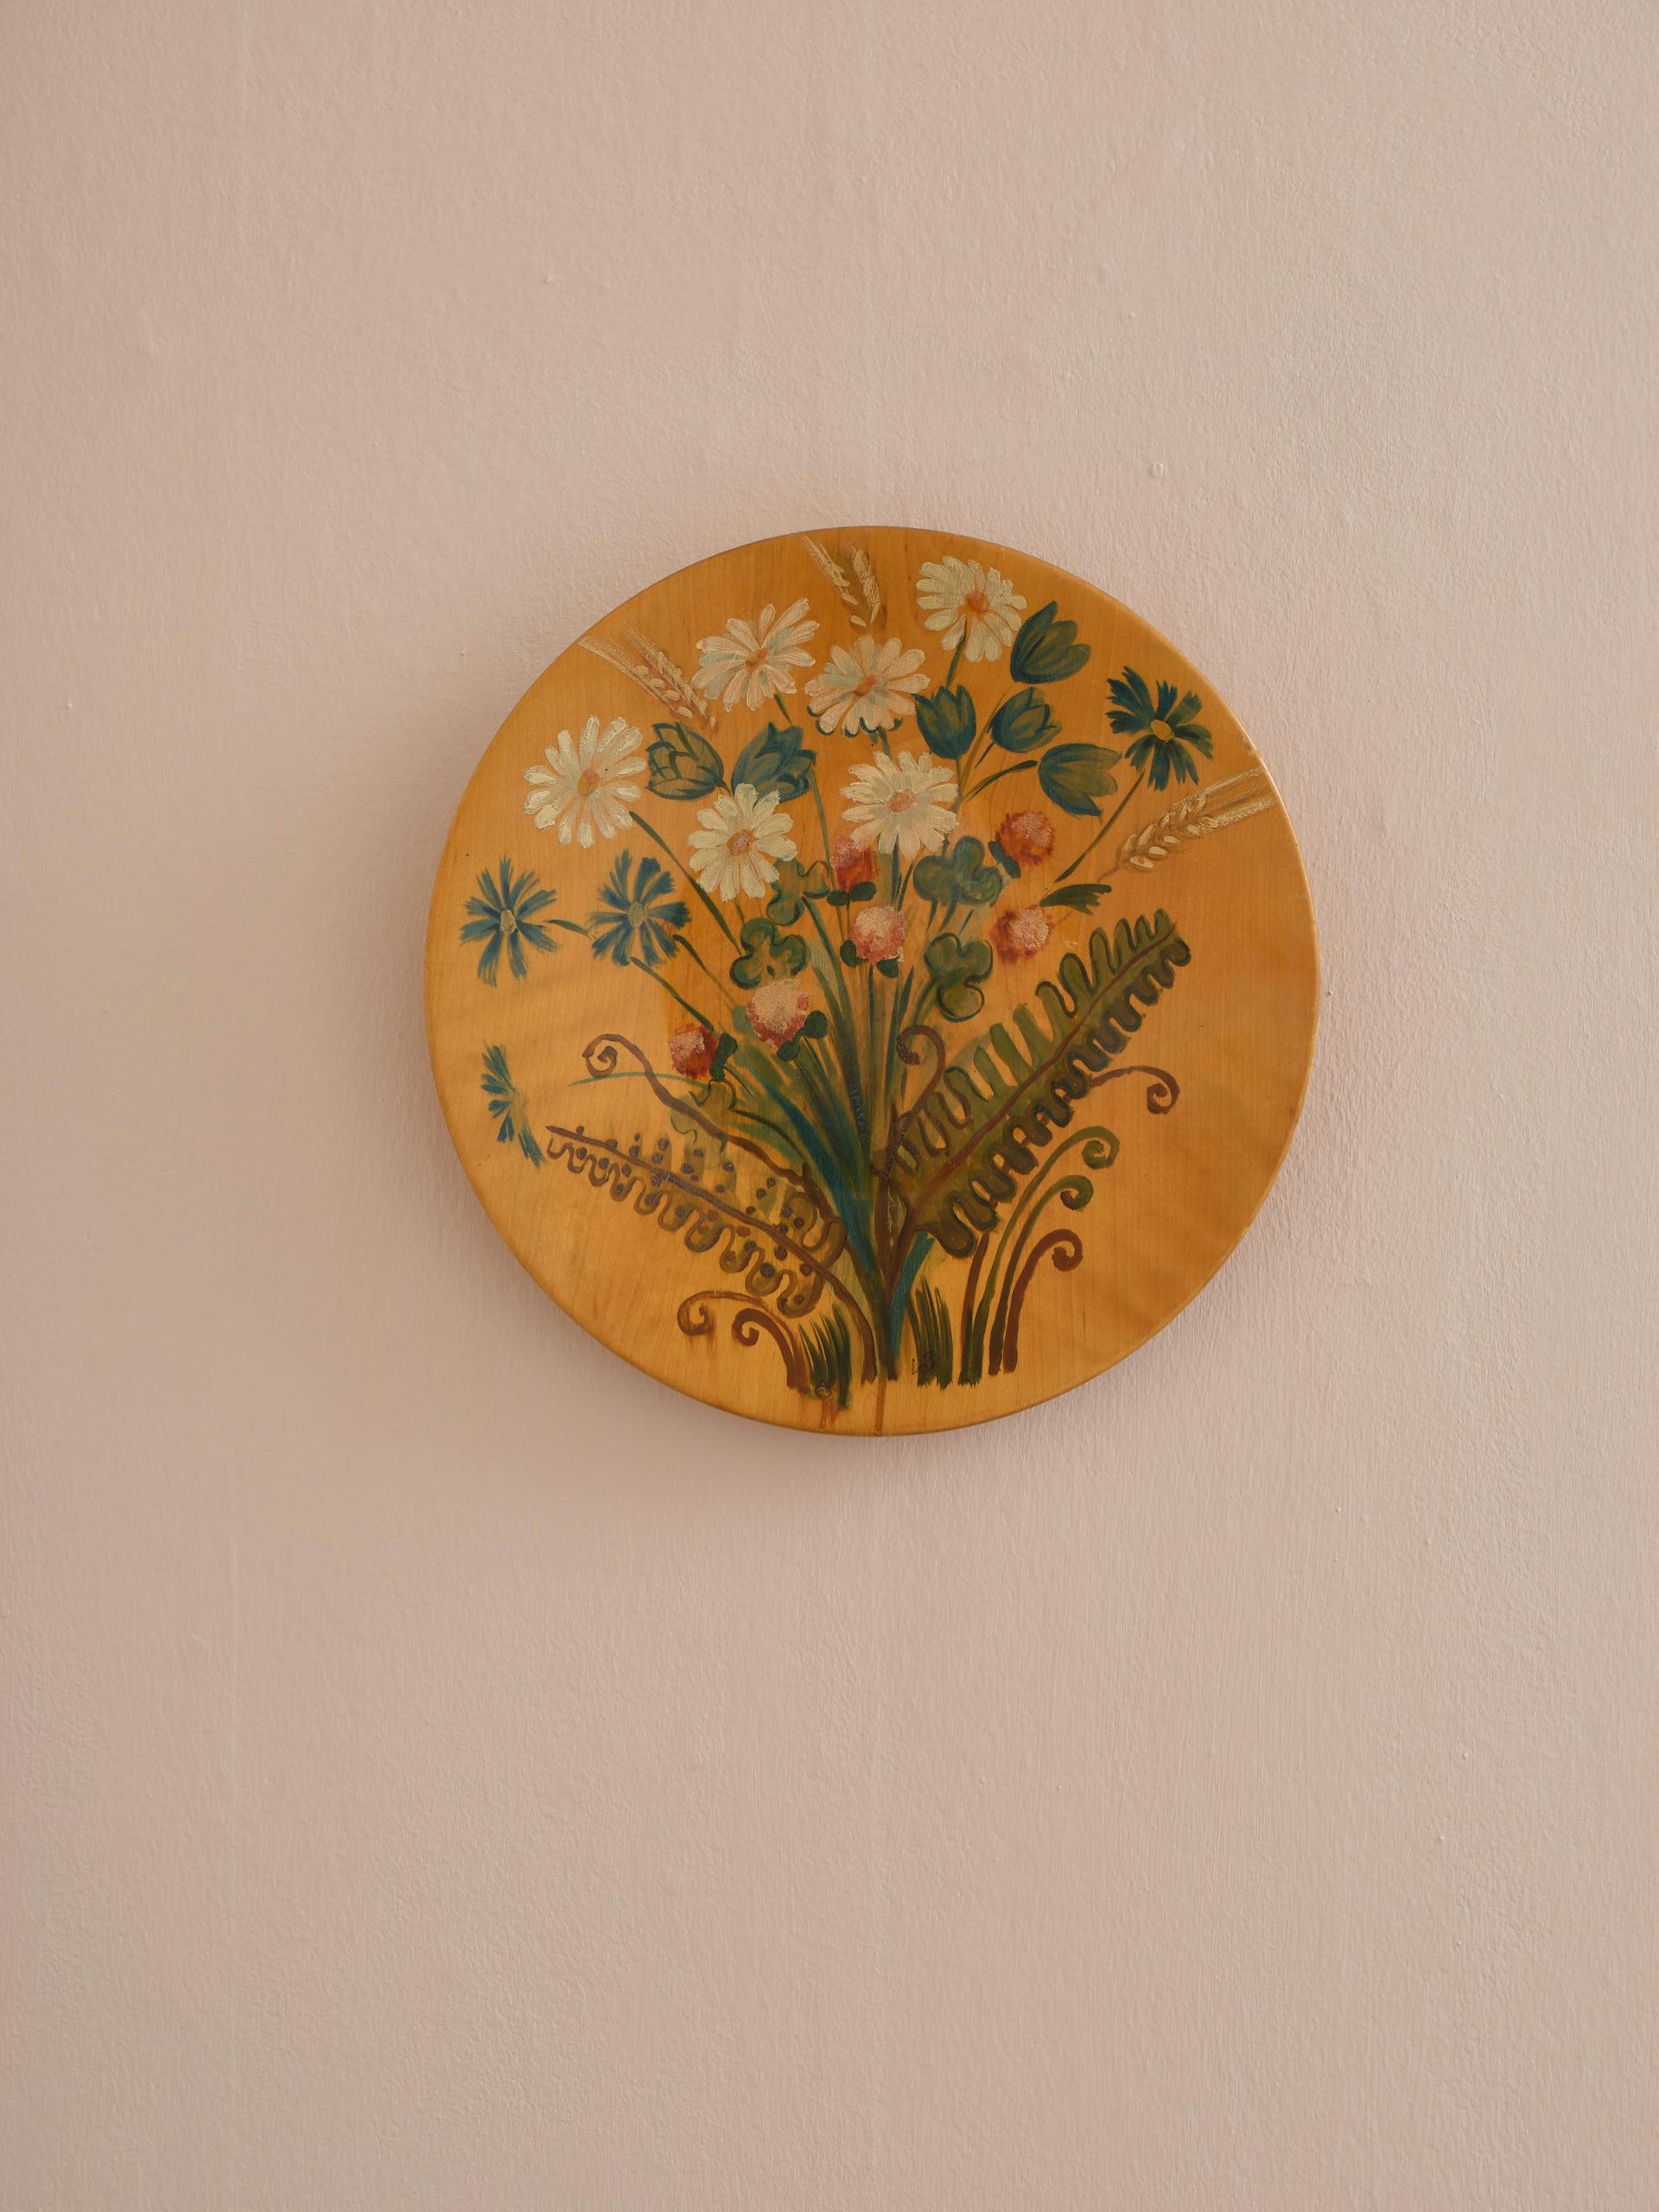 Unique one of a kind wall decoration or dish made out of lacquered wood and handpainted with botanical motifs in eye soothing colors. Signed on the back by the artist.

Diameter: 32 cm (12.6 in) // Height: 5 cm (1.97 in).